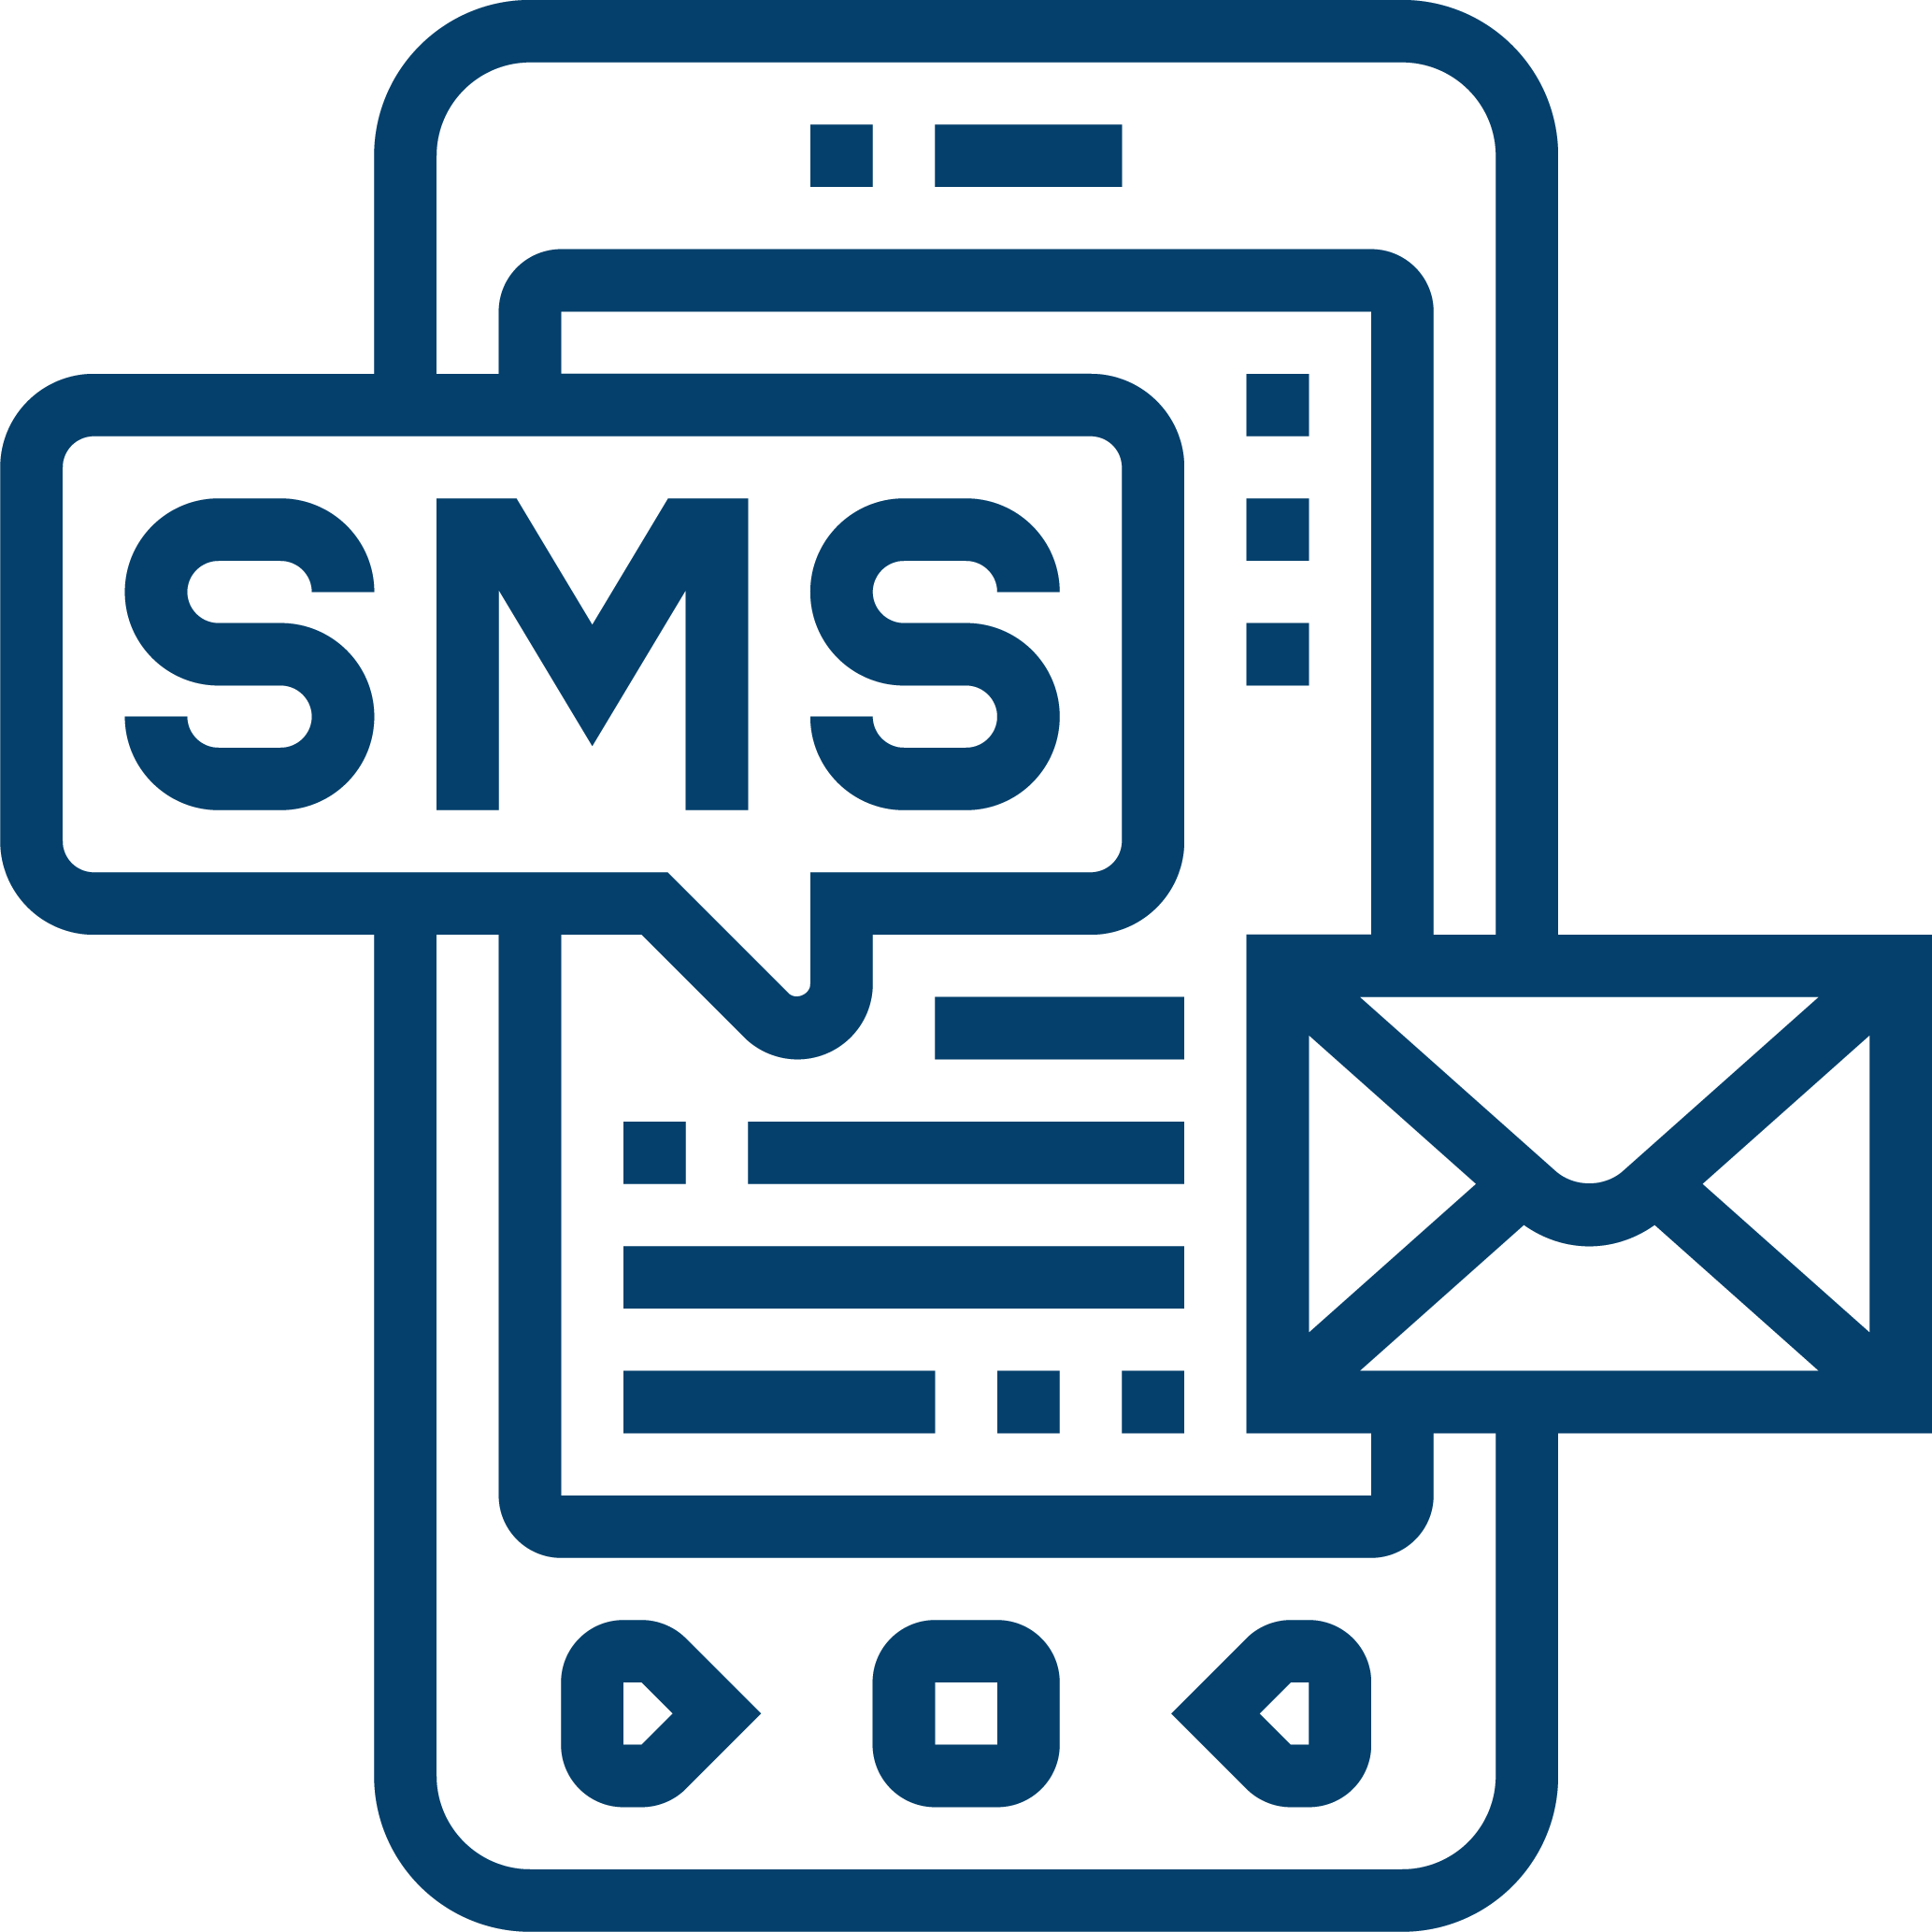 SMS campaign creation